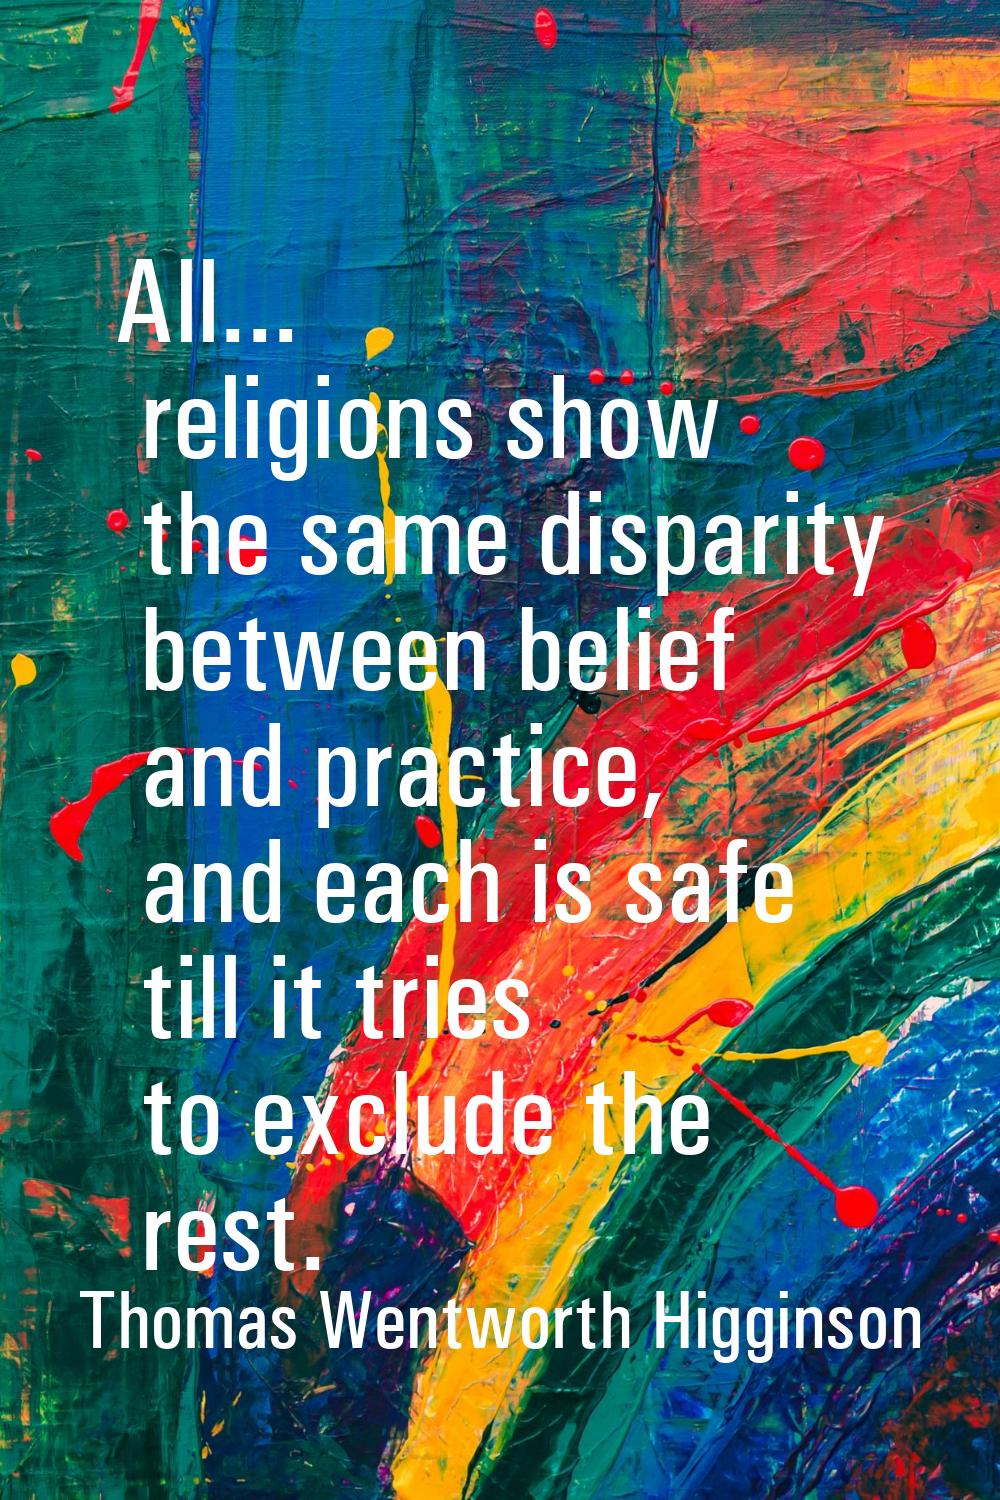 All... religions show the same disparity between belief and practice, and each is safe till it trie